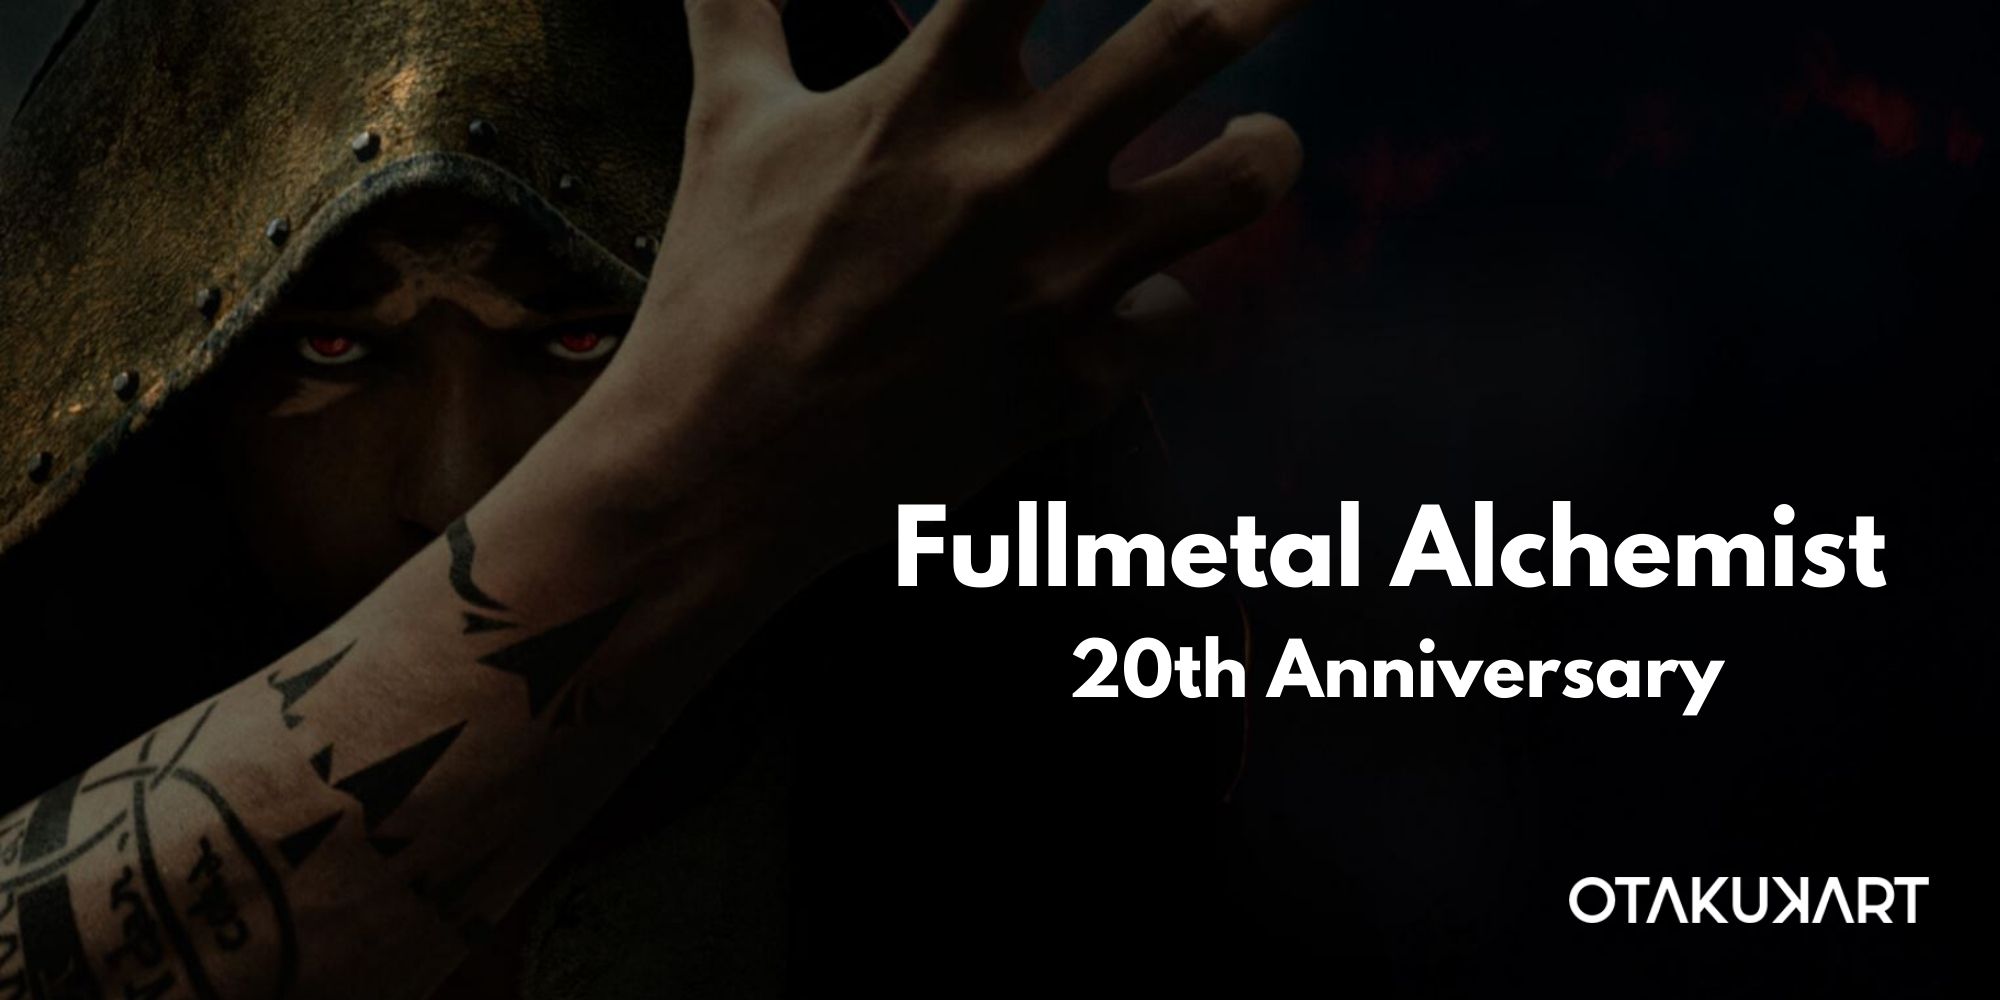 Fullmetal Alchemist Celebrated 20th Anniversary With New Project